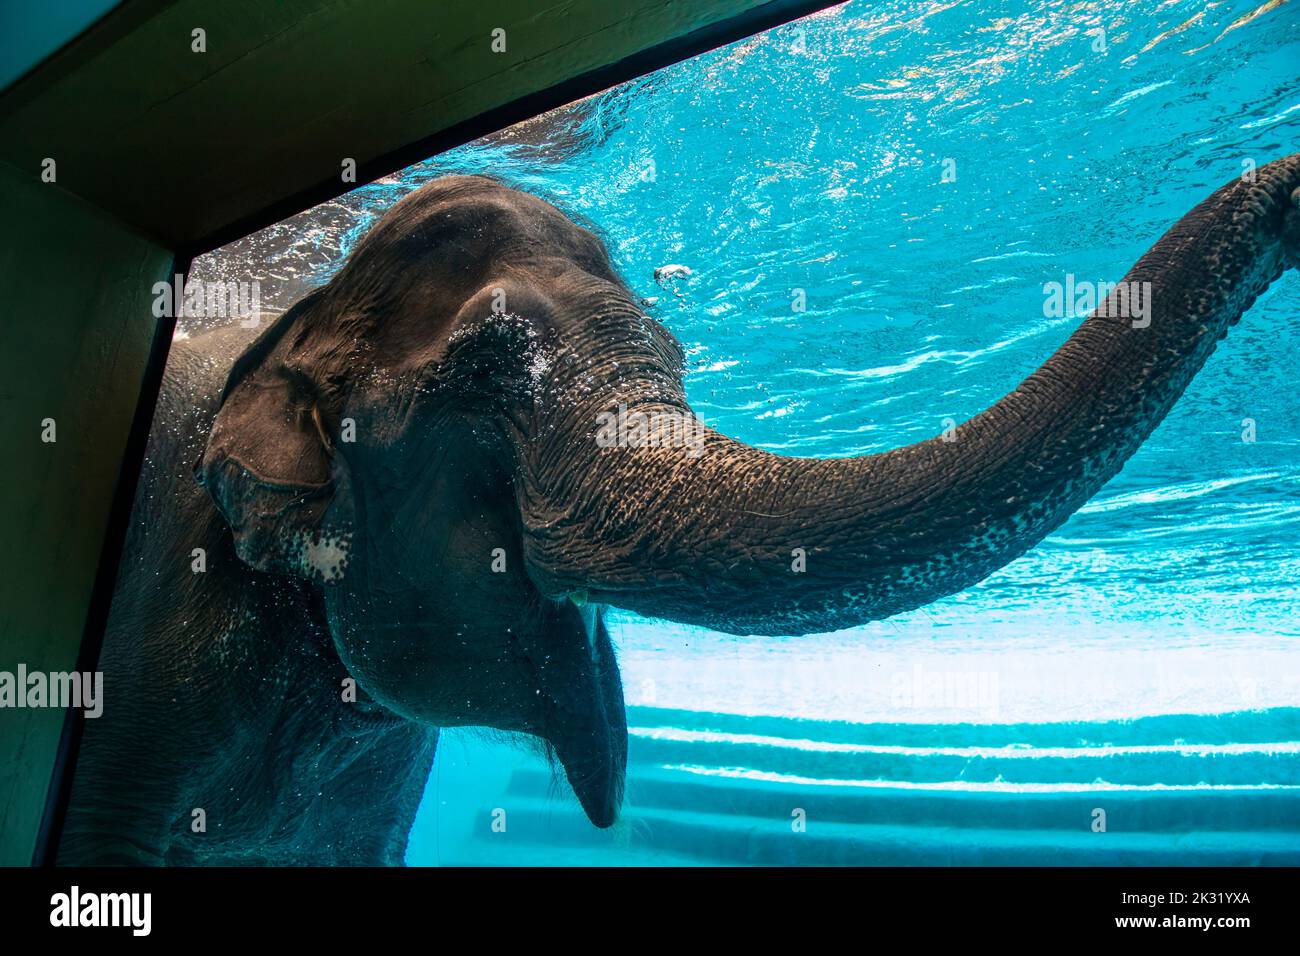 Chonburi Thailand 10th Jun 2022: The tourists  are watching Asian elephant (Elephas maximu) swimming in the big tank in khao kheow open zoo. Stock Photo